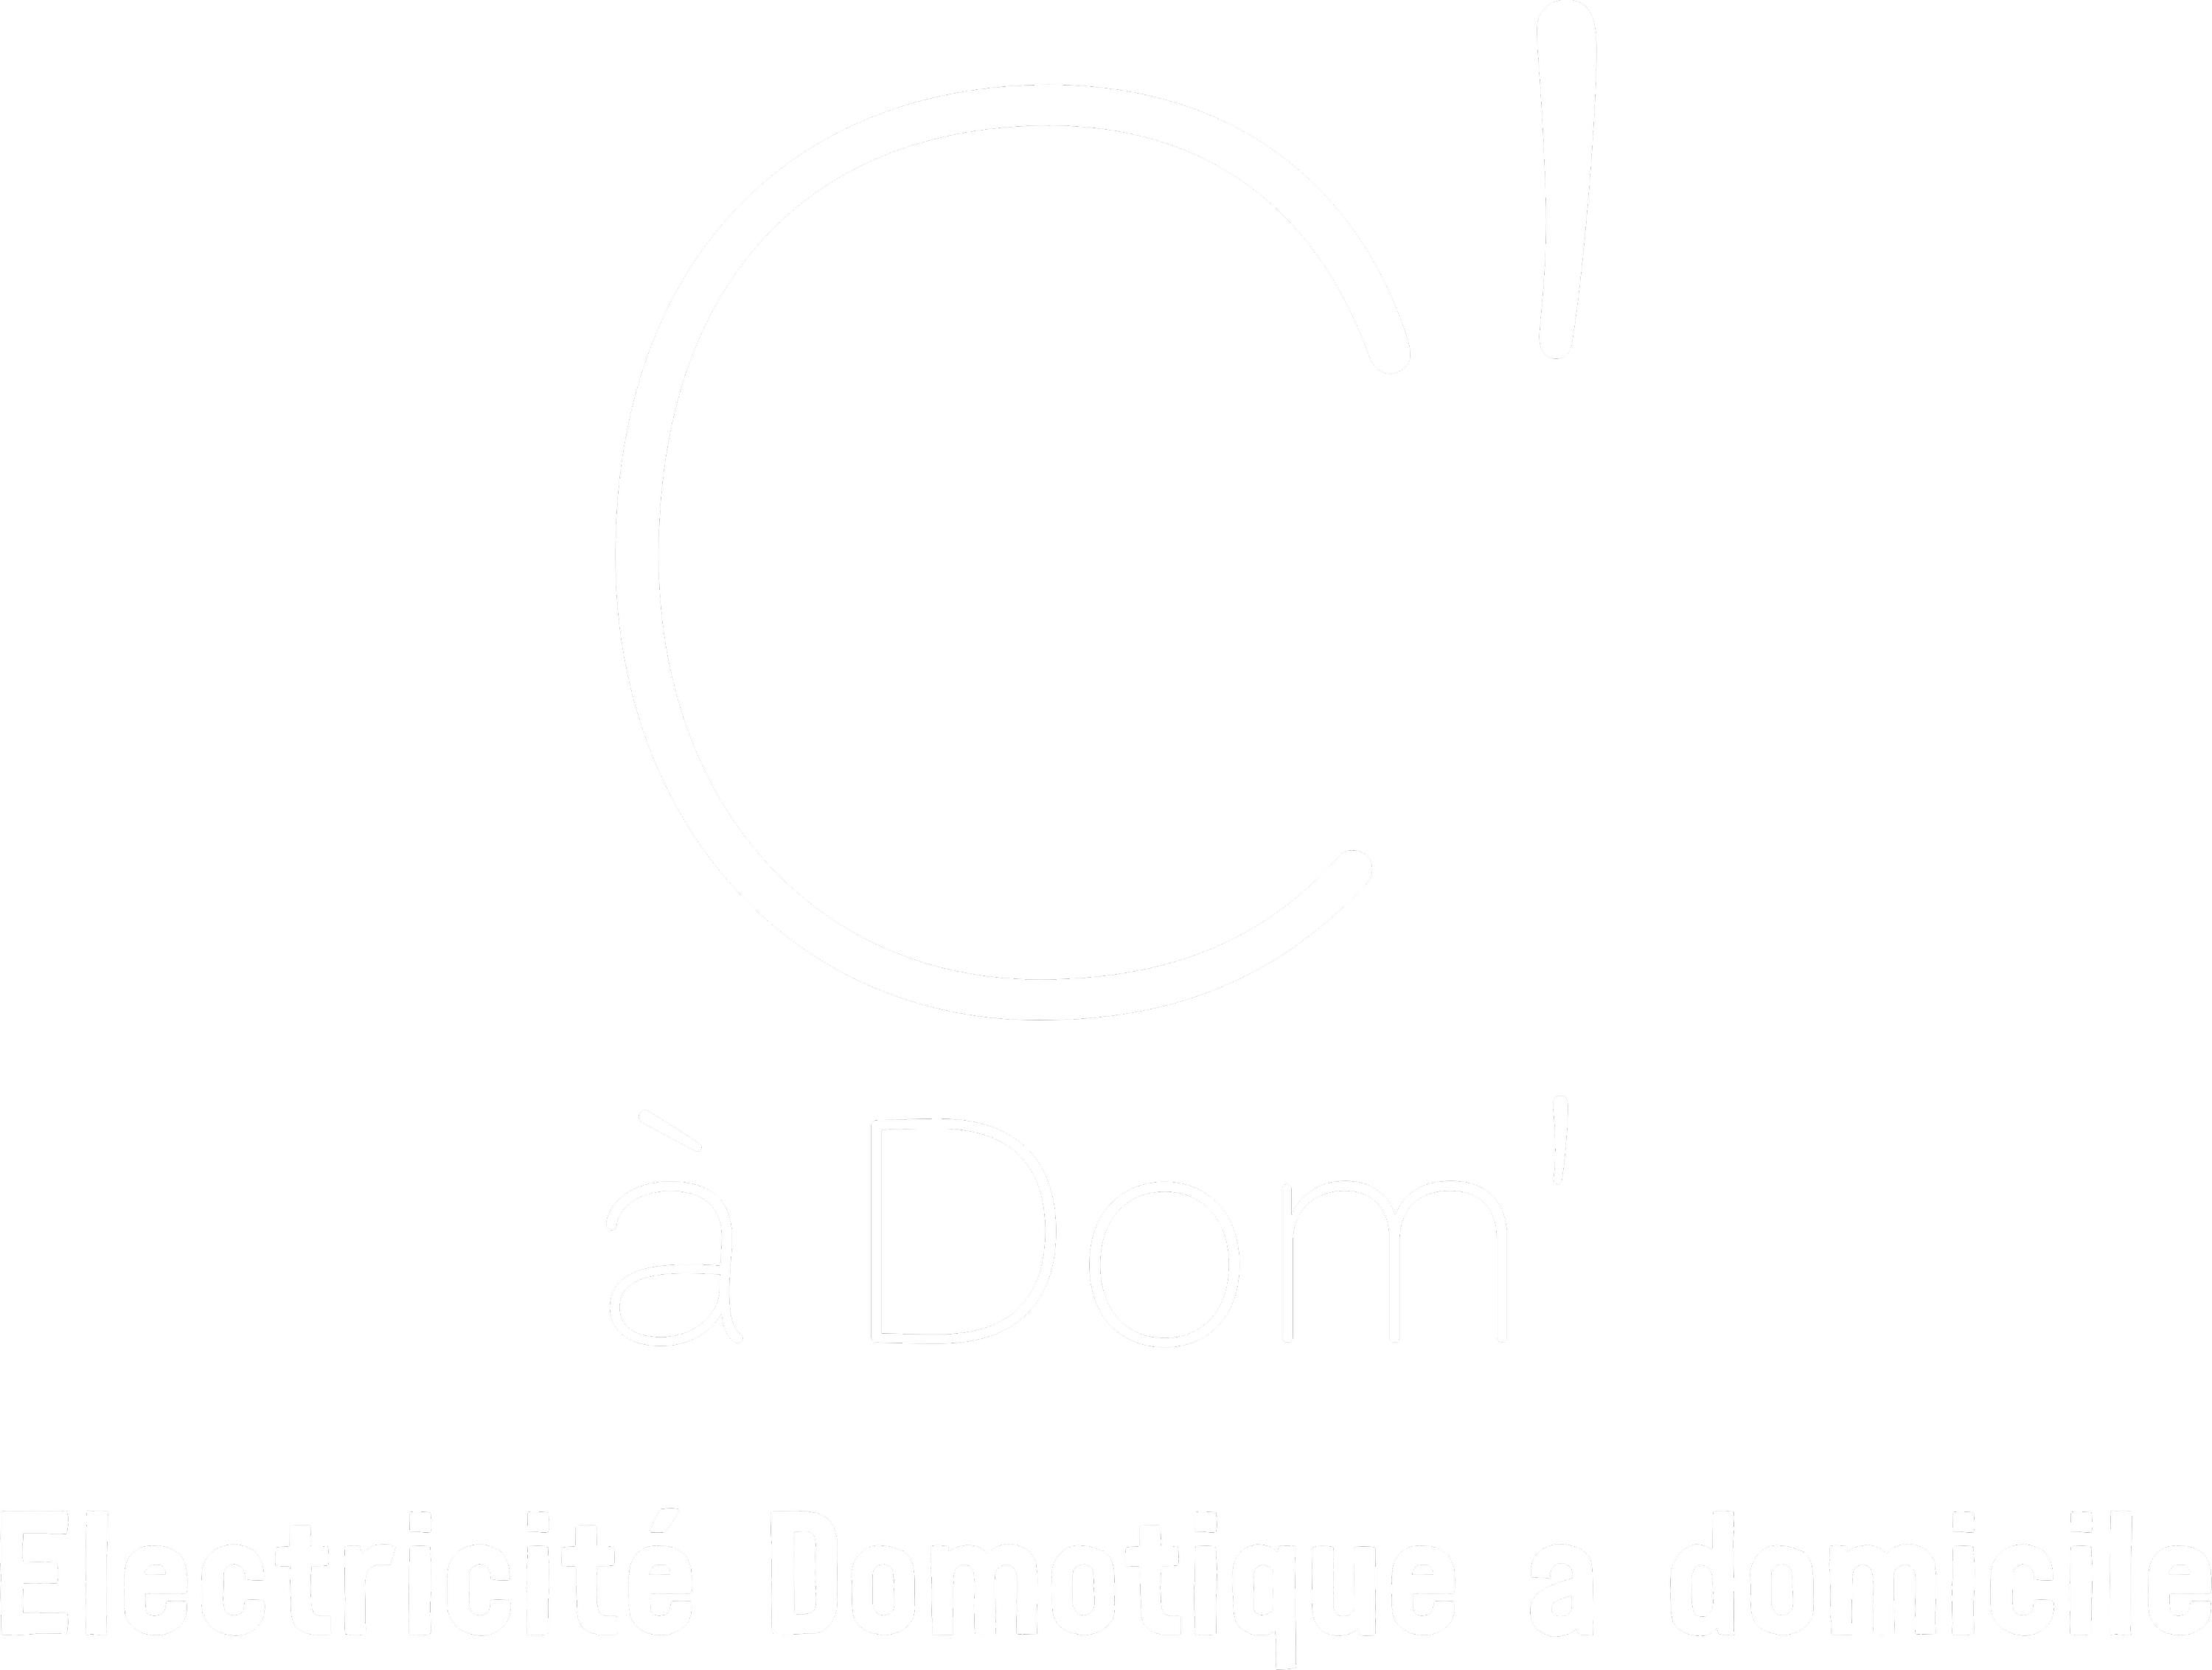 C' a Dom'